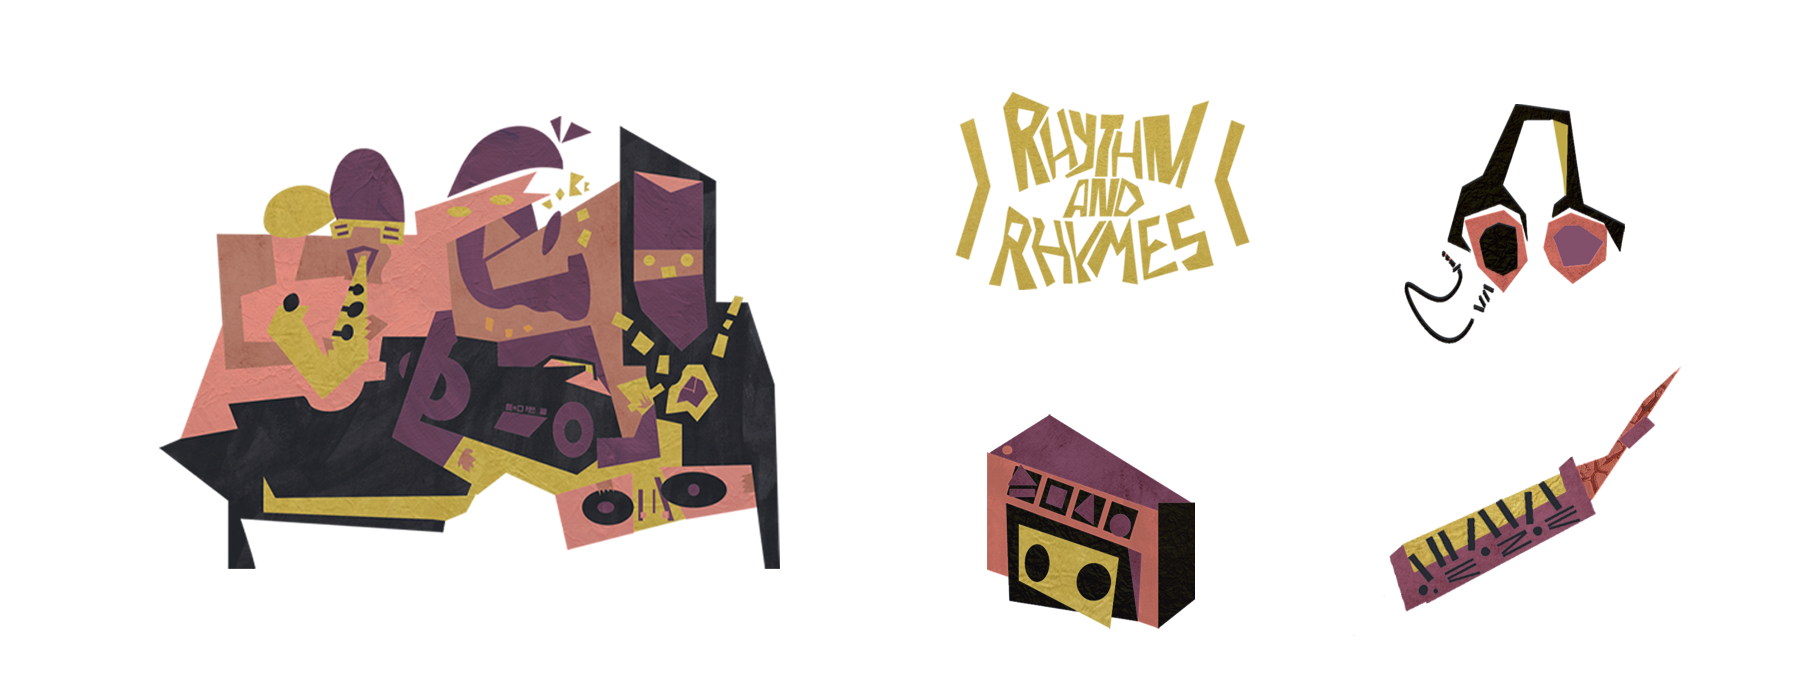 Picasso inspired illustrations for Elizabeth Ave Station's Rhythm and Rhymes event graphics featuring 3 musicians, a boombox, headphones, keytar, and funky type made out of abstract shapes.